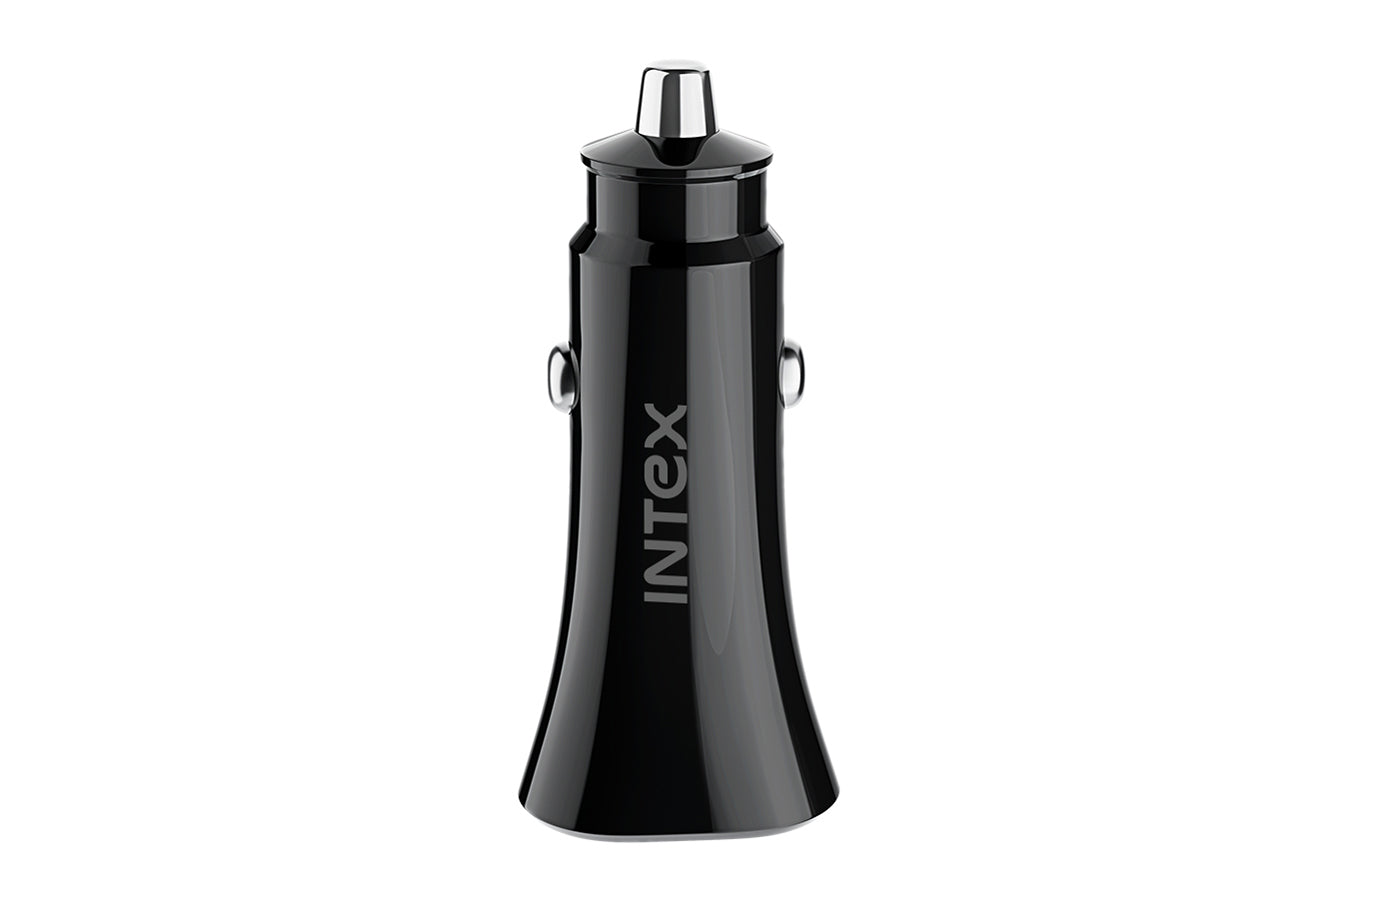 Buy Intex Swift 20WPD QC Car Charger Online at Best Price in india